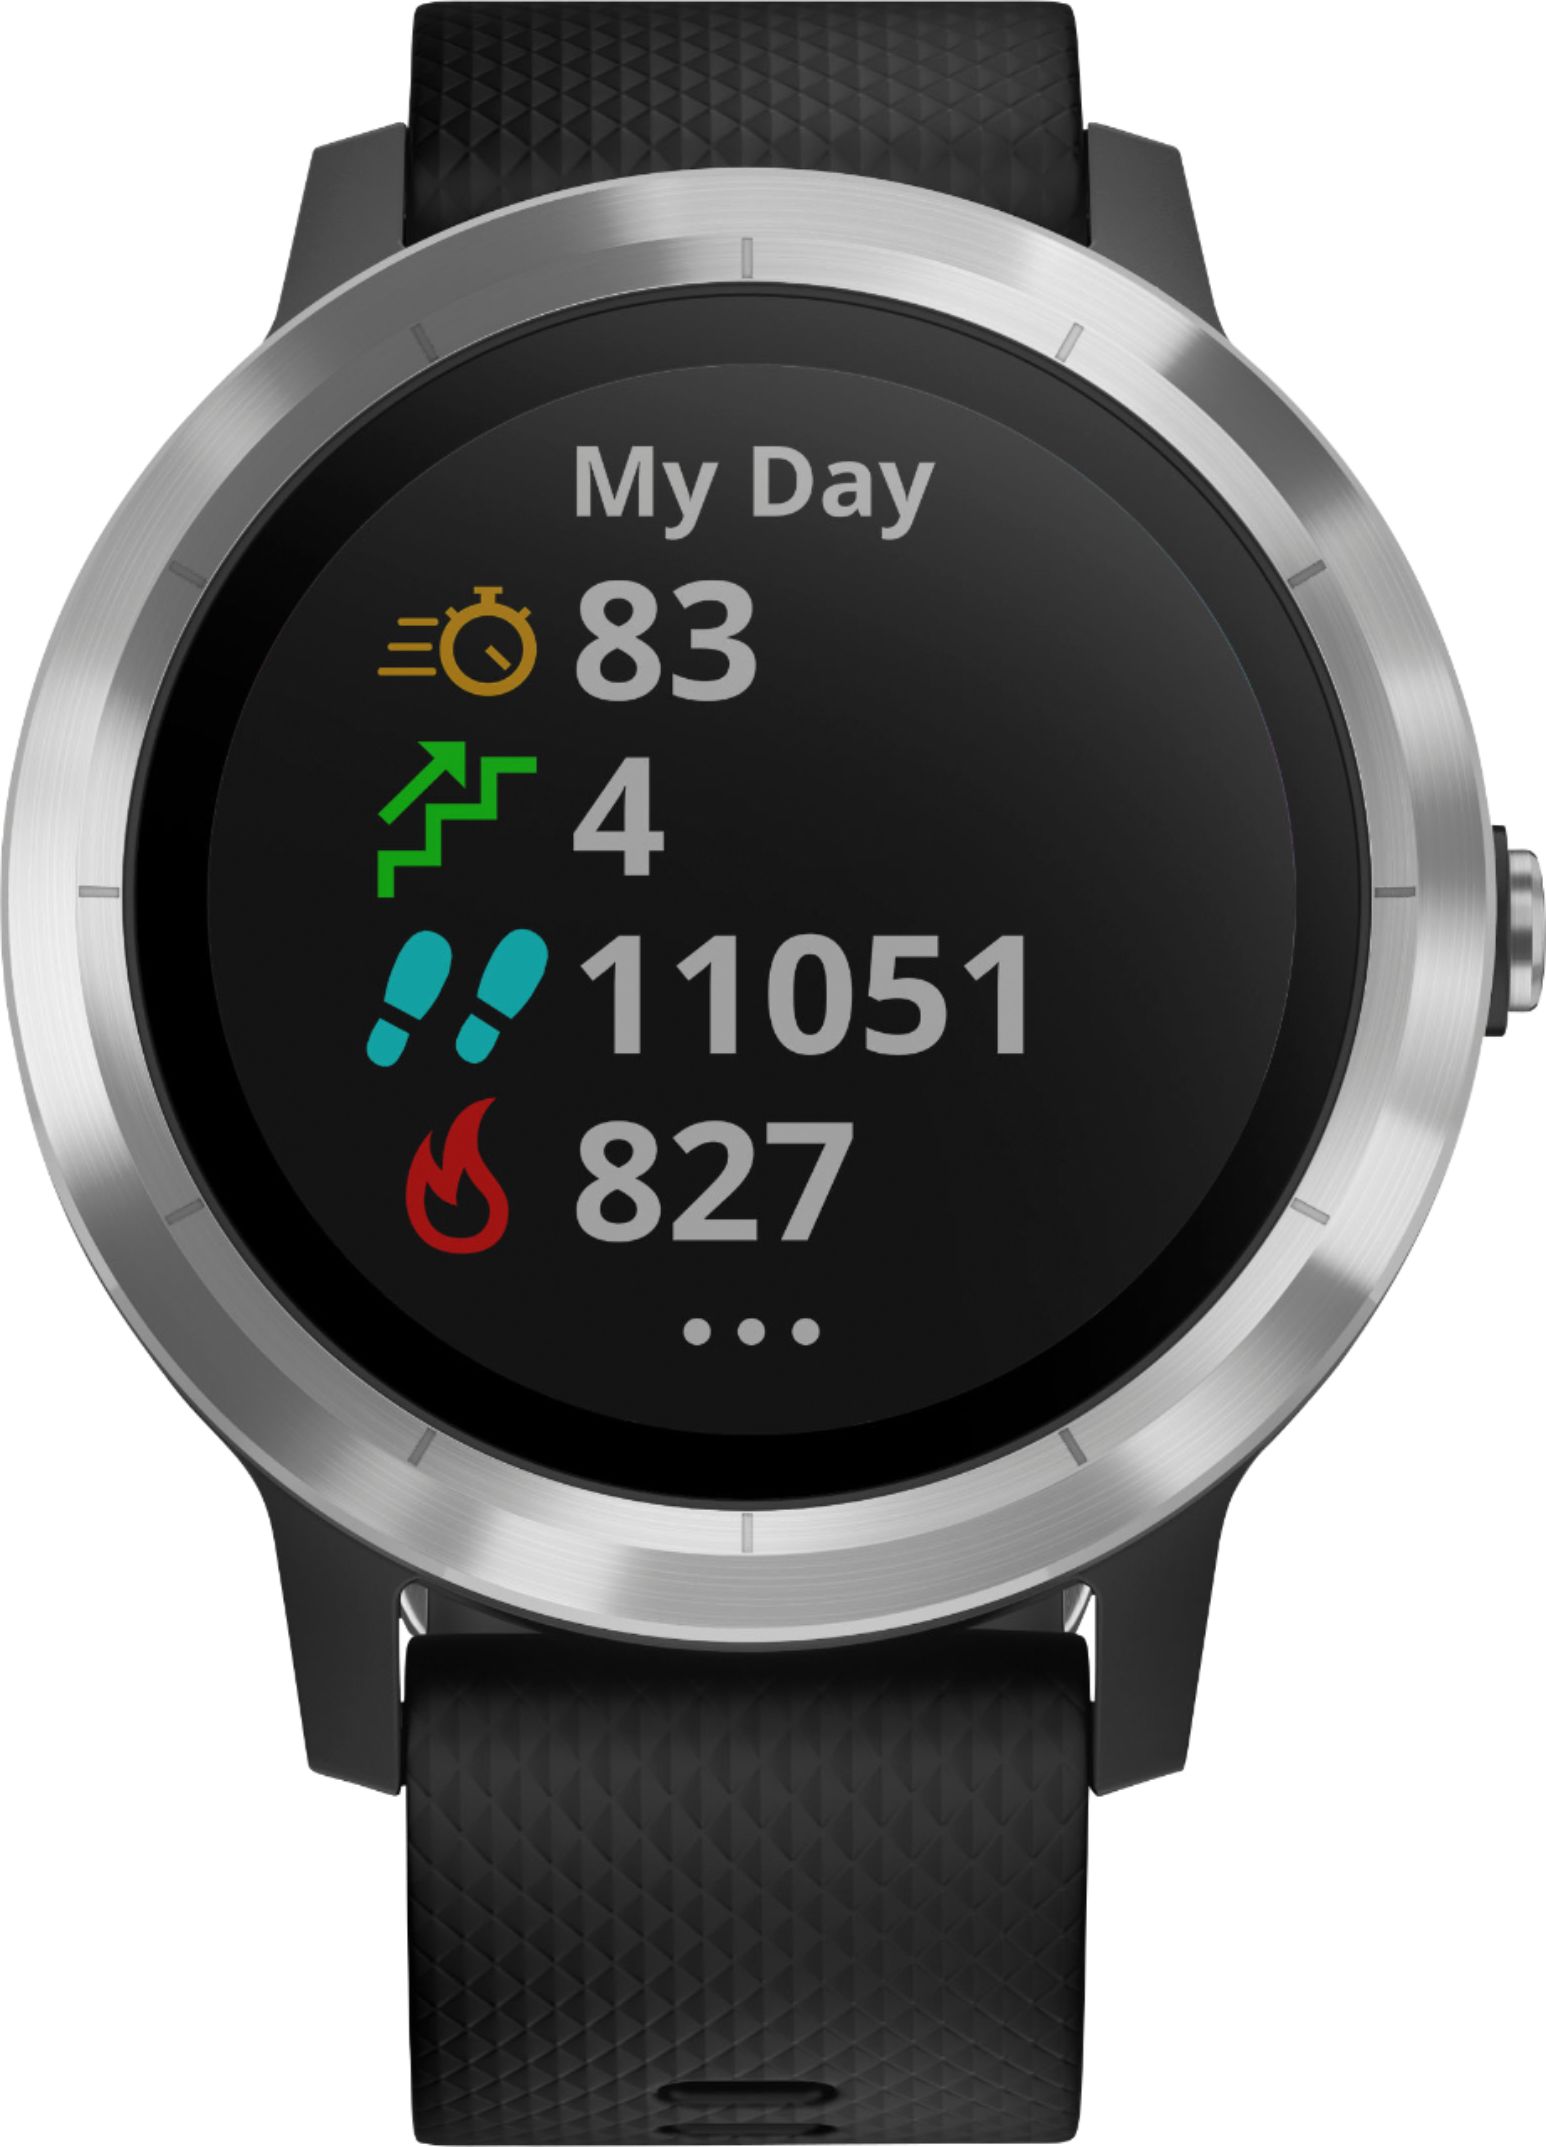 Garmin Vivoactive 3 GPS Smartwatch with Built-In Sports Apps and Wrist HeartRate 